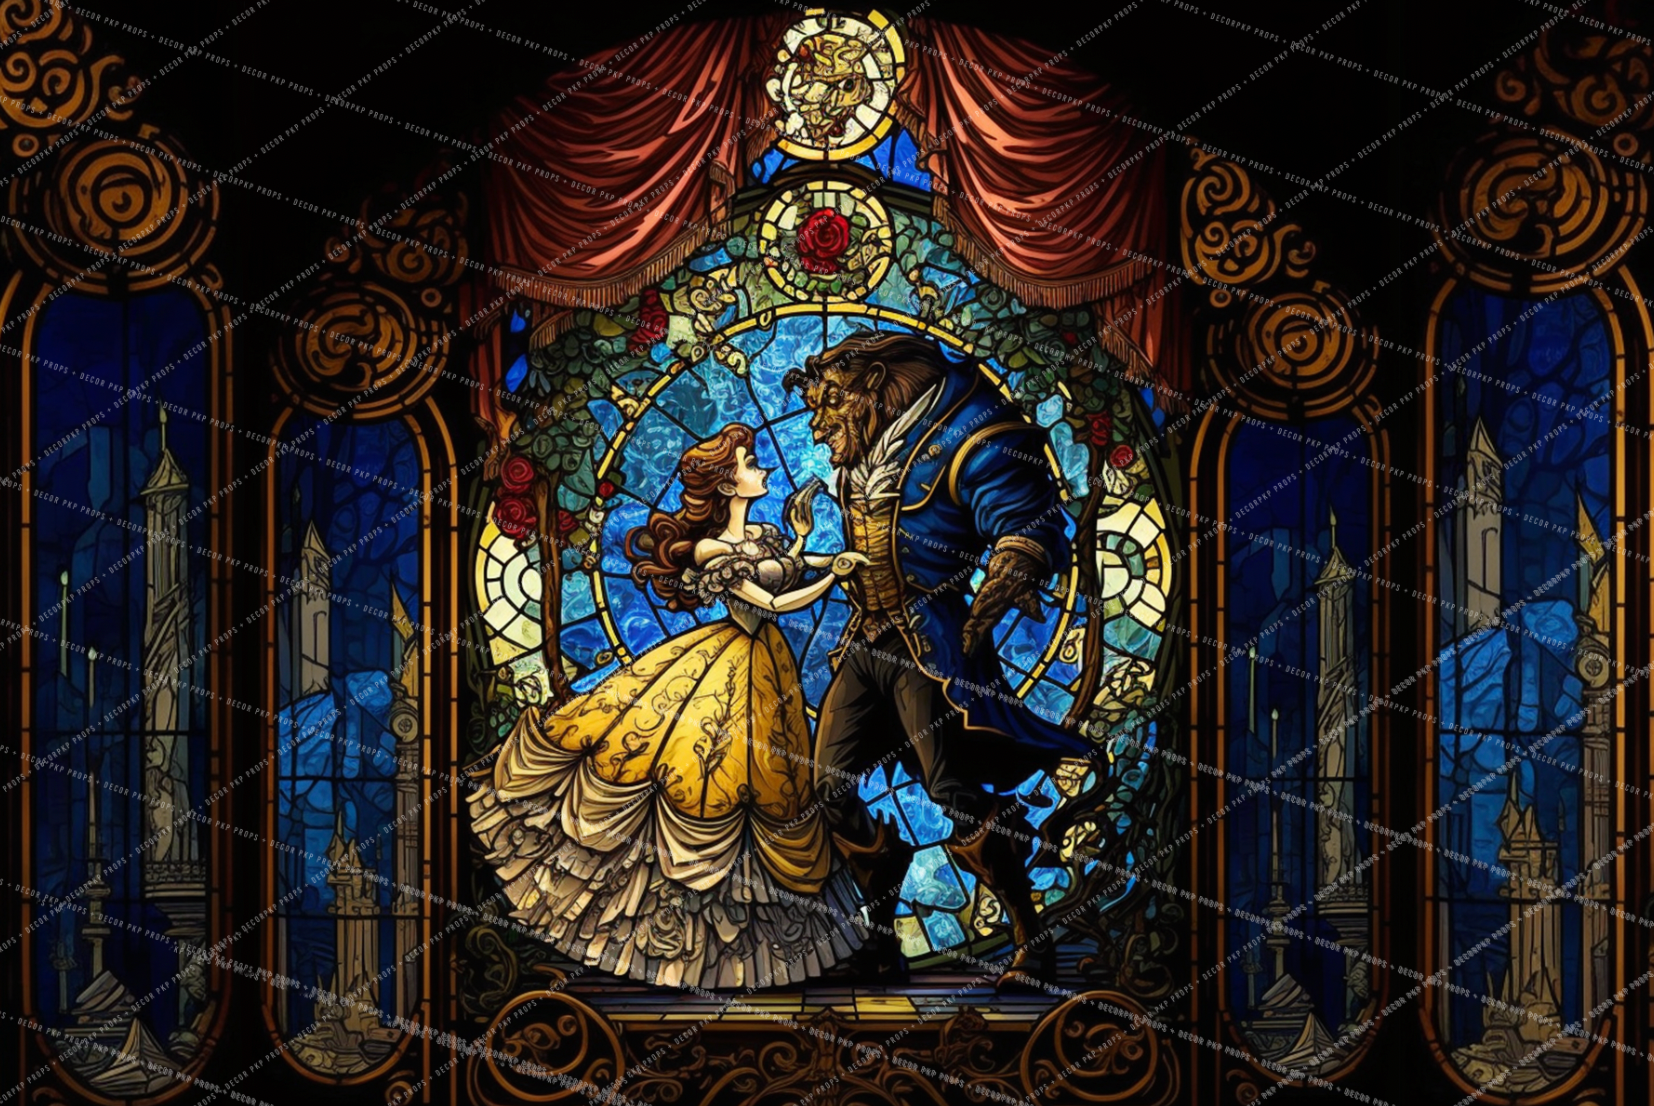 Mystical Beauty and the Beast Stained Glass Window Panel With Red Rose  Beauty & Beast Stain Glass Art Decor Customizable Item249 